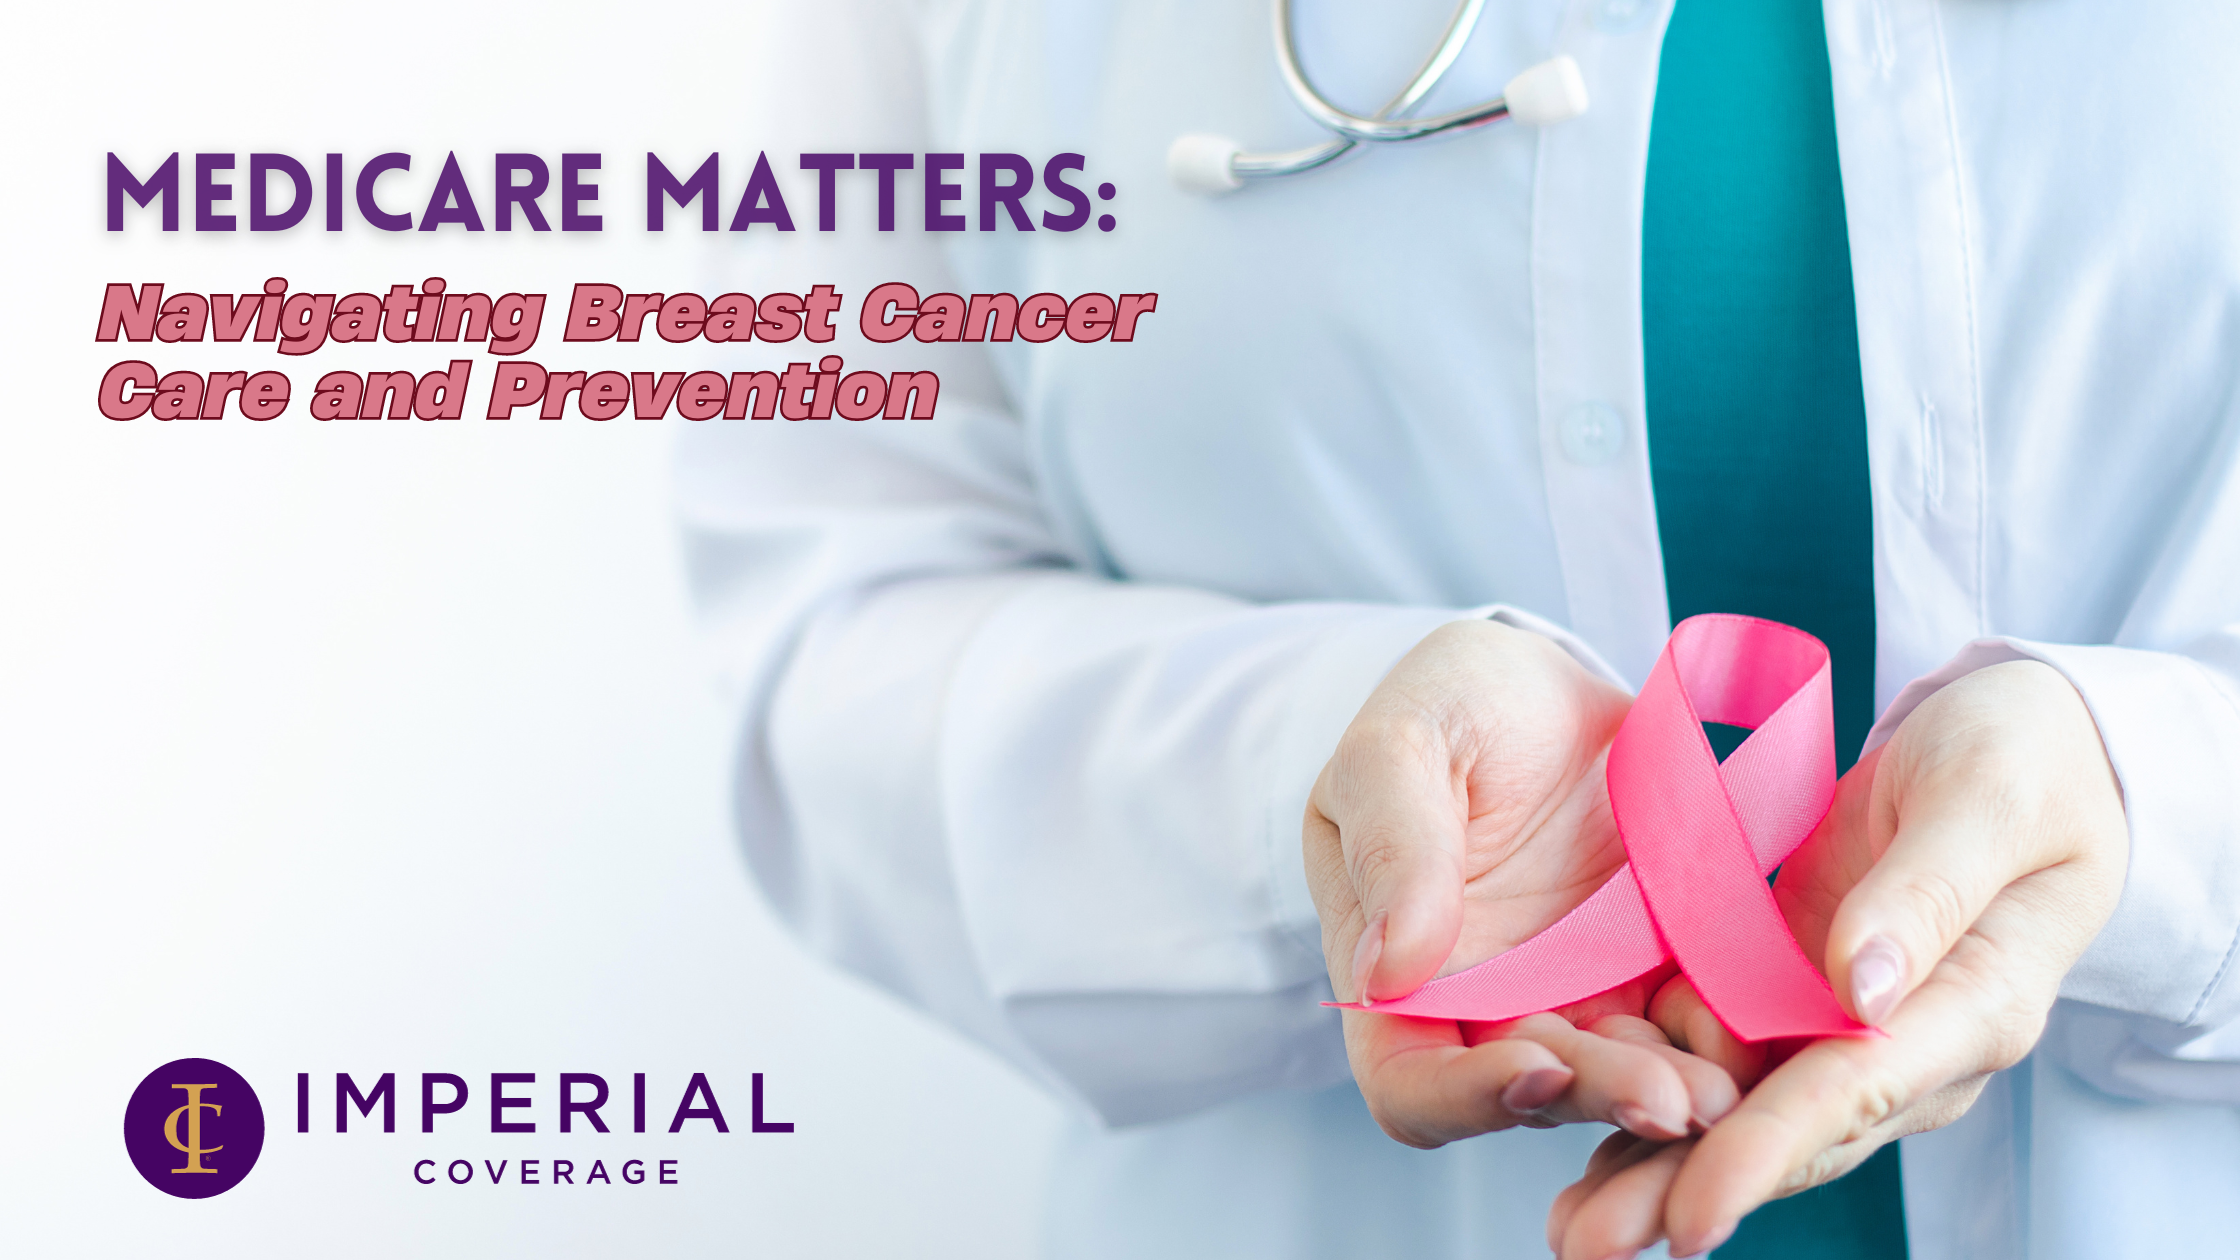 Breast Cancer Awareness Month: Helping Beneficiaries Navigate Their Medicare Coverage and Prevention